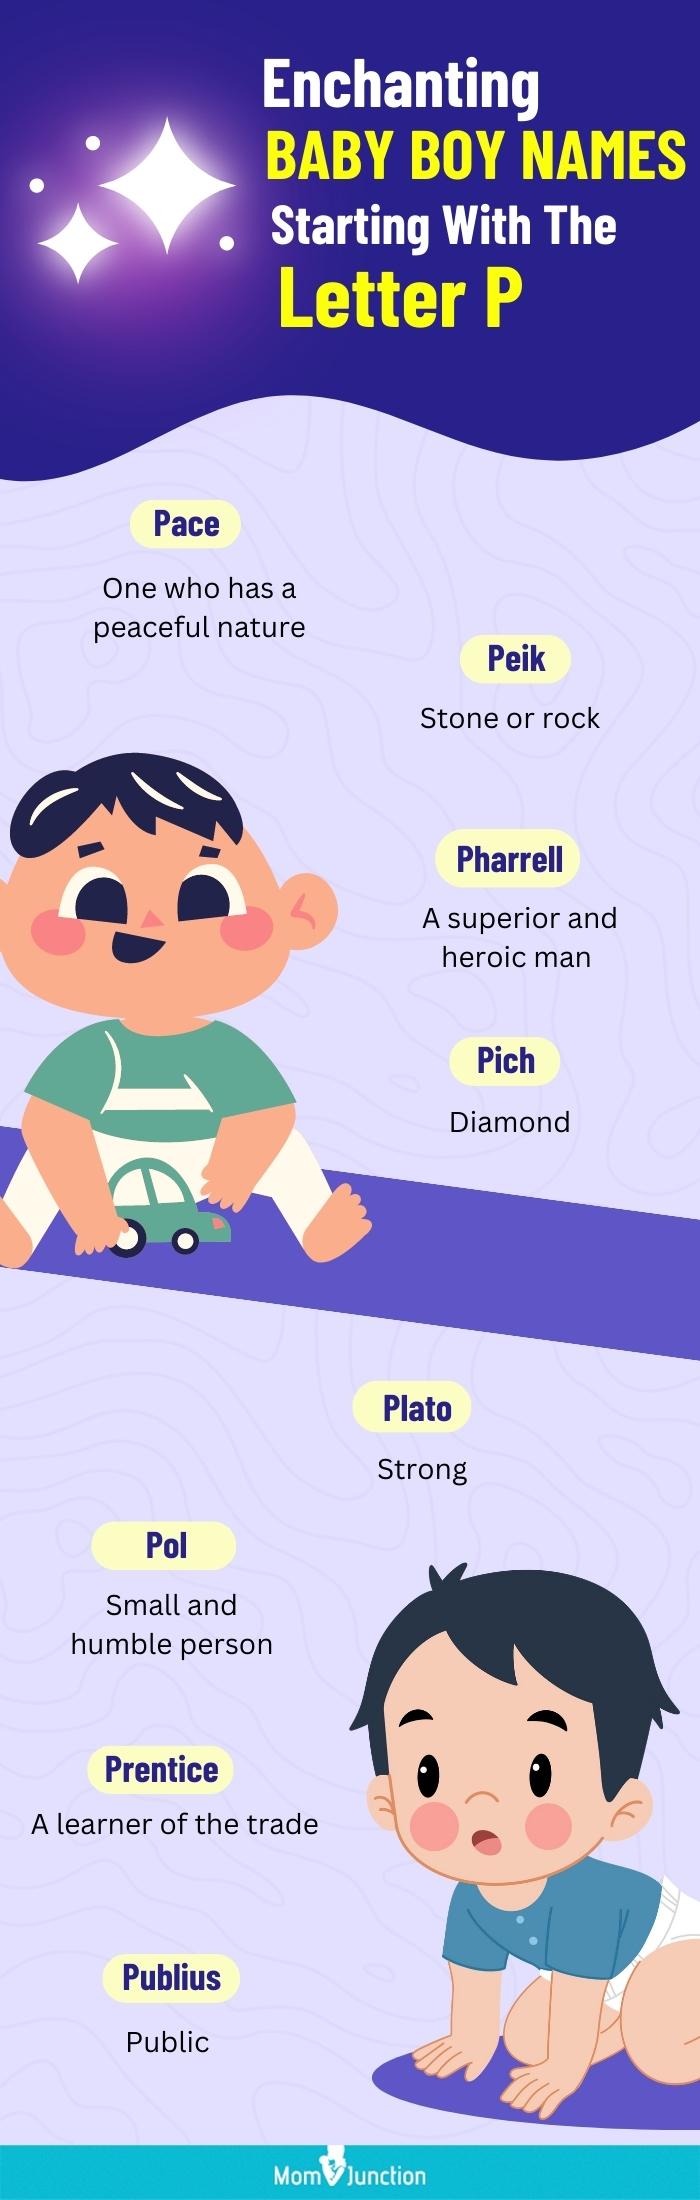 enchanting baby boy names starting with the letter p (infographic)